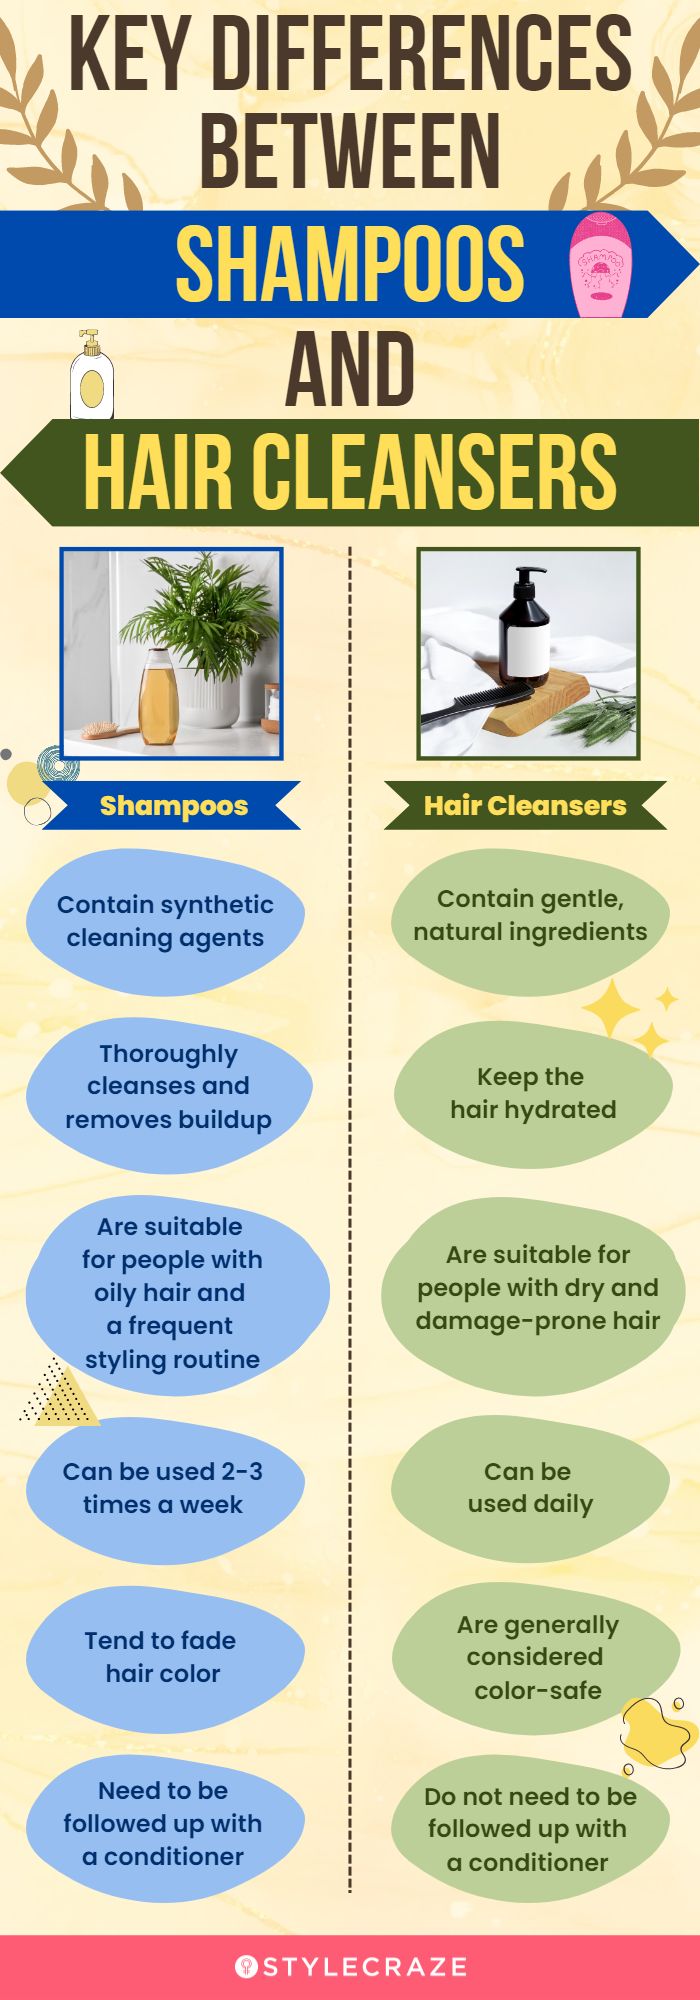 Shampoo Vs Conditioner: The Difference In Ingredients, Usage